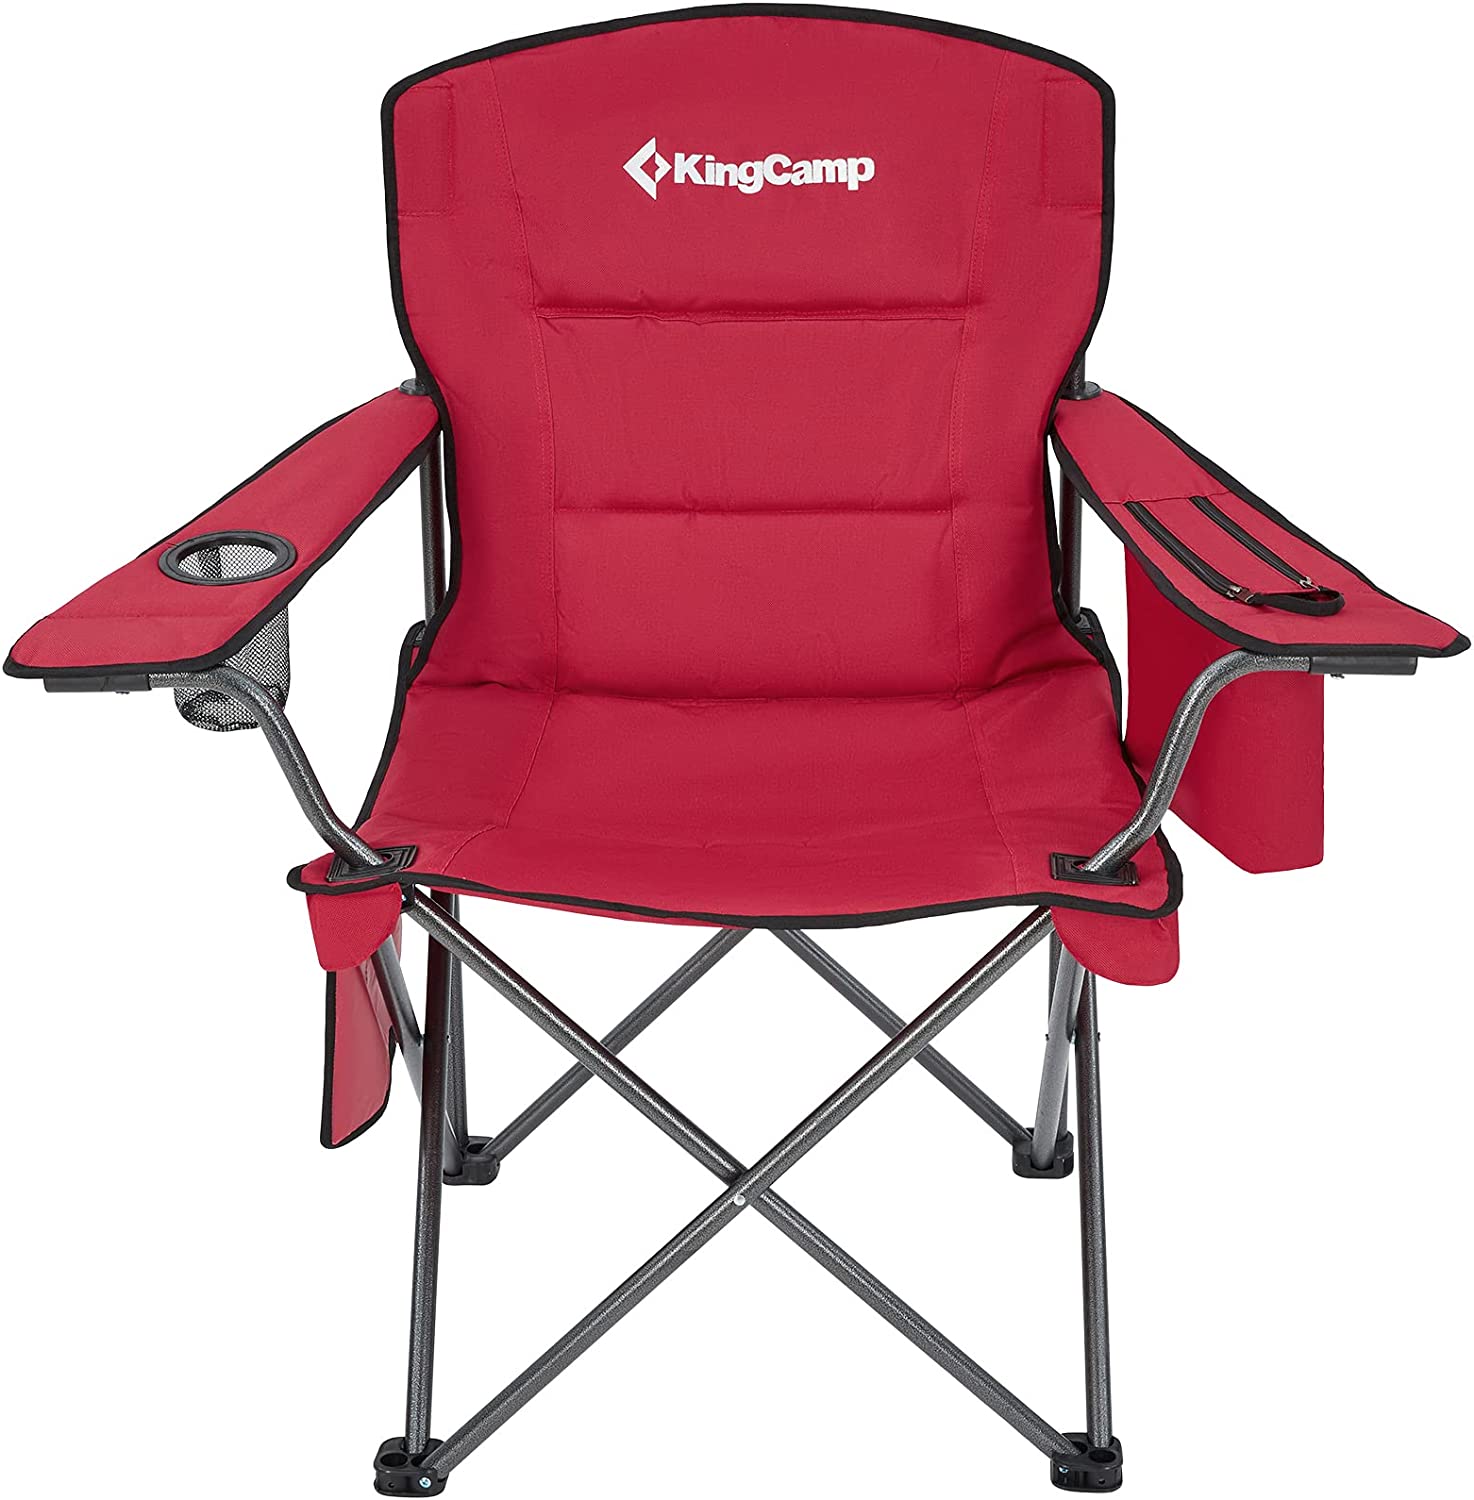 KingCamp Oversized Outdoor Camping Folding Chair